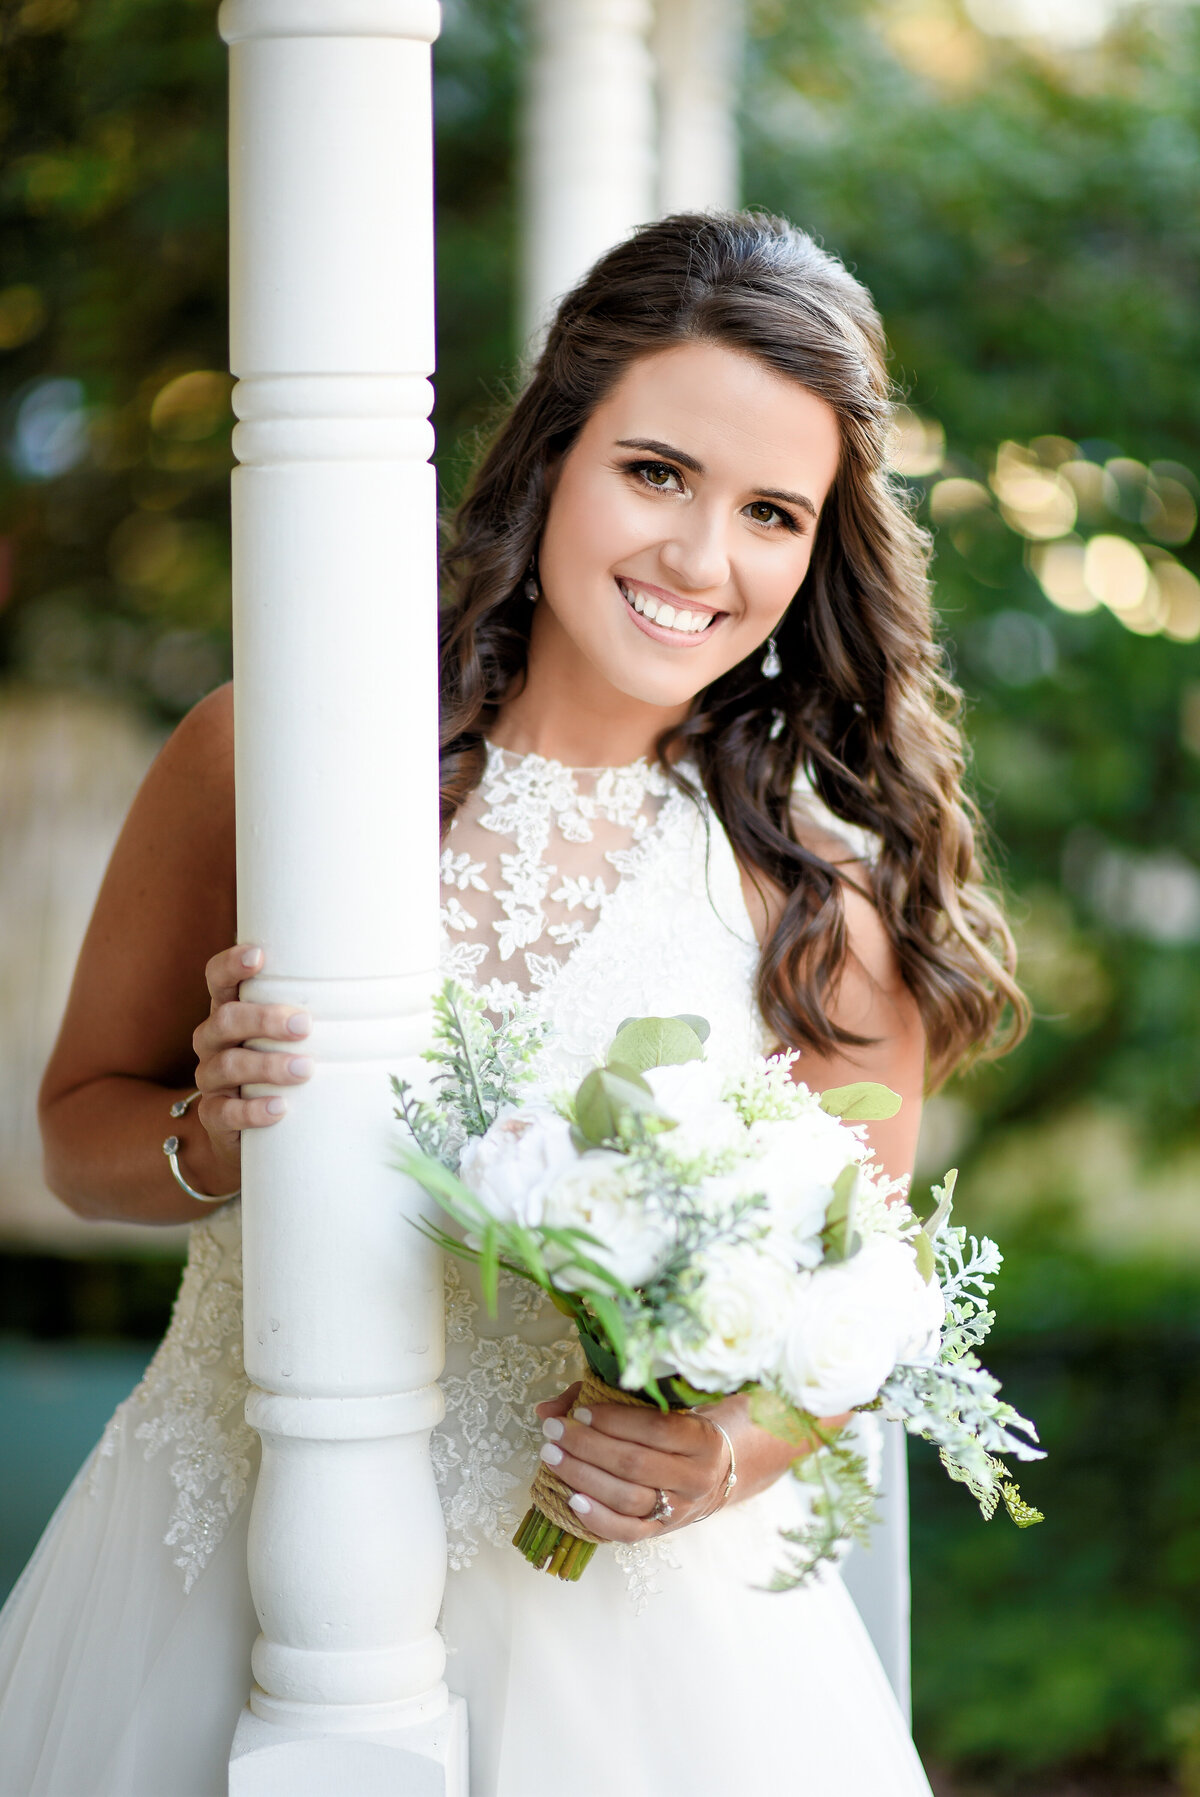 Beautiful bridal portrait photography: Bride leans behind a column from the porch of an old Mississippi farmhouse